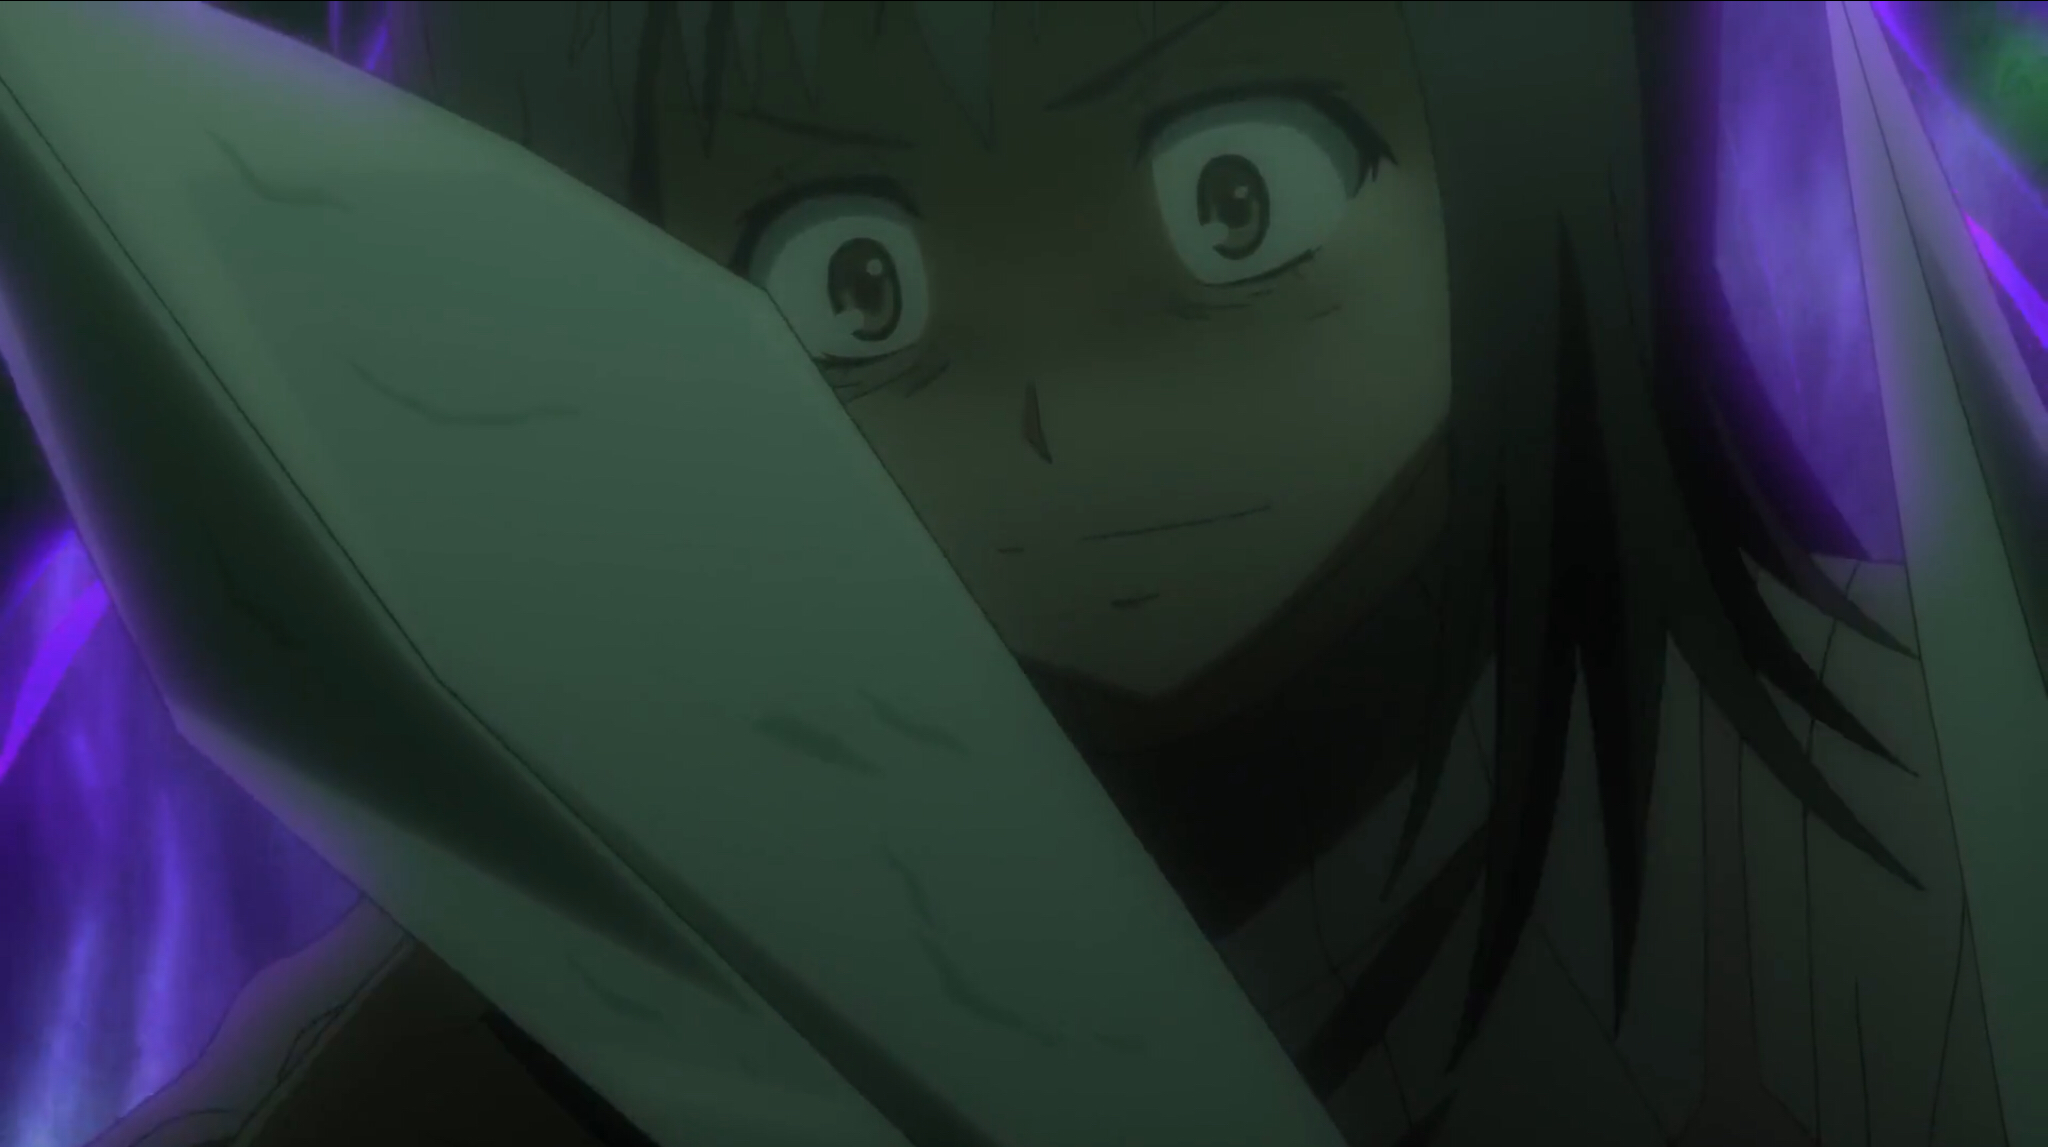 Itsuwa Being “Scary” Blank Meme Template